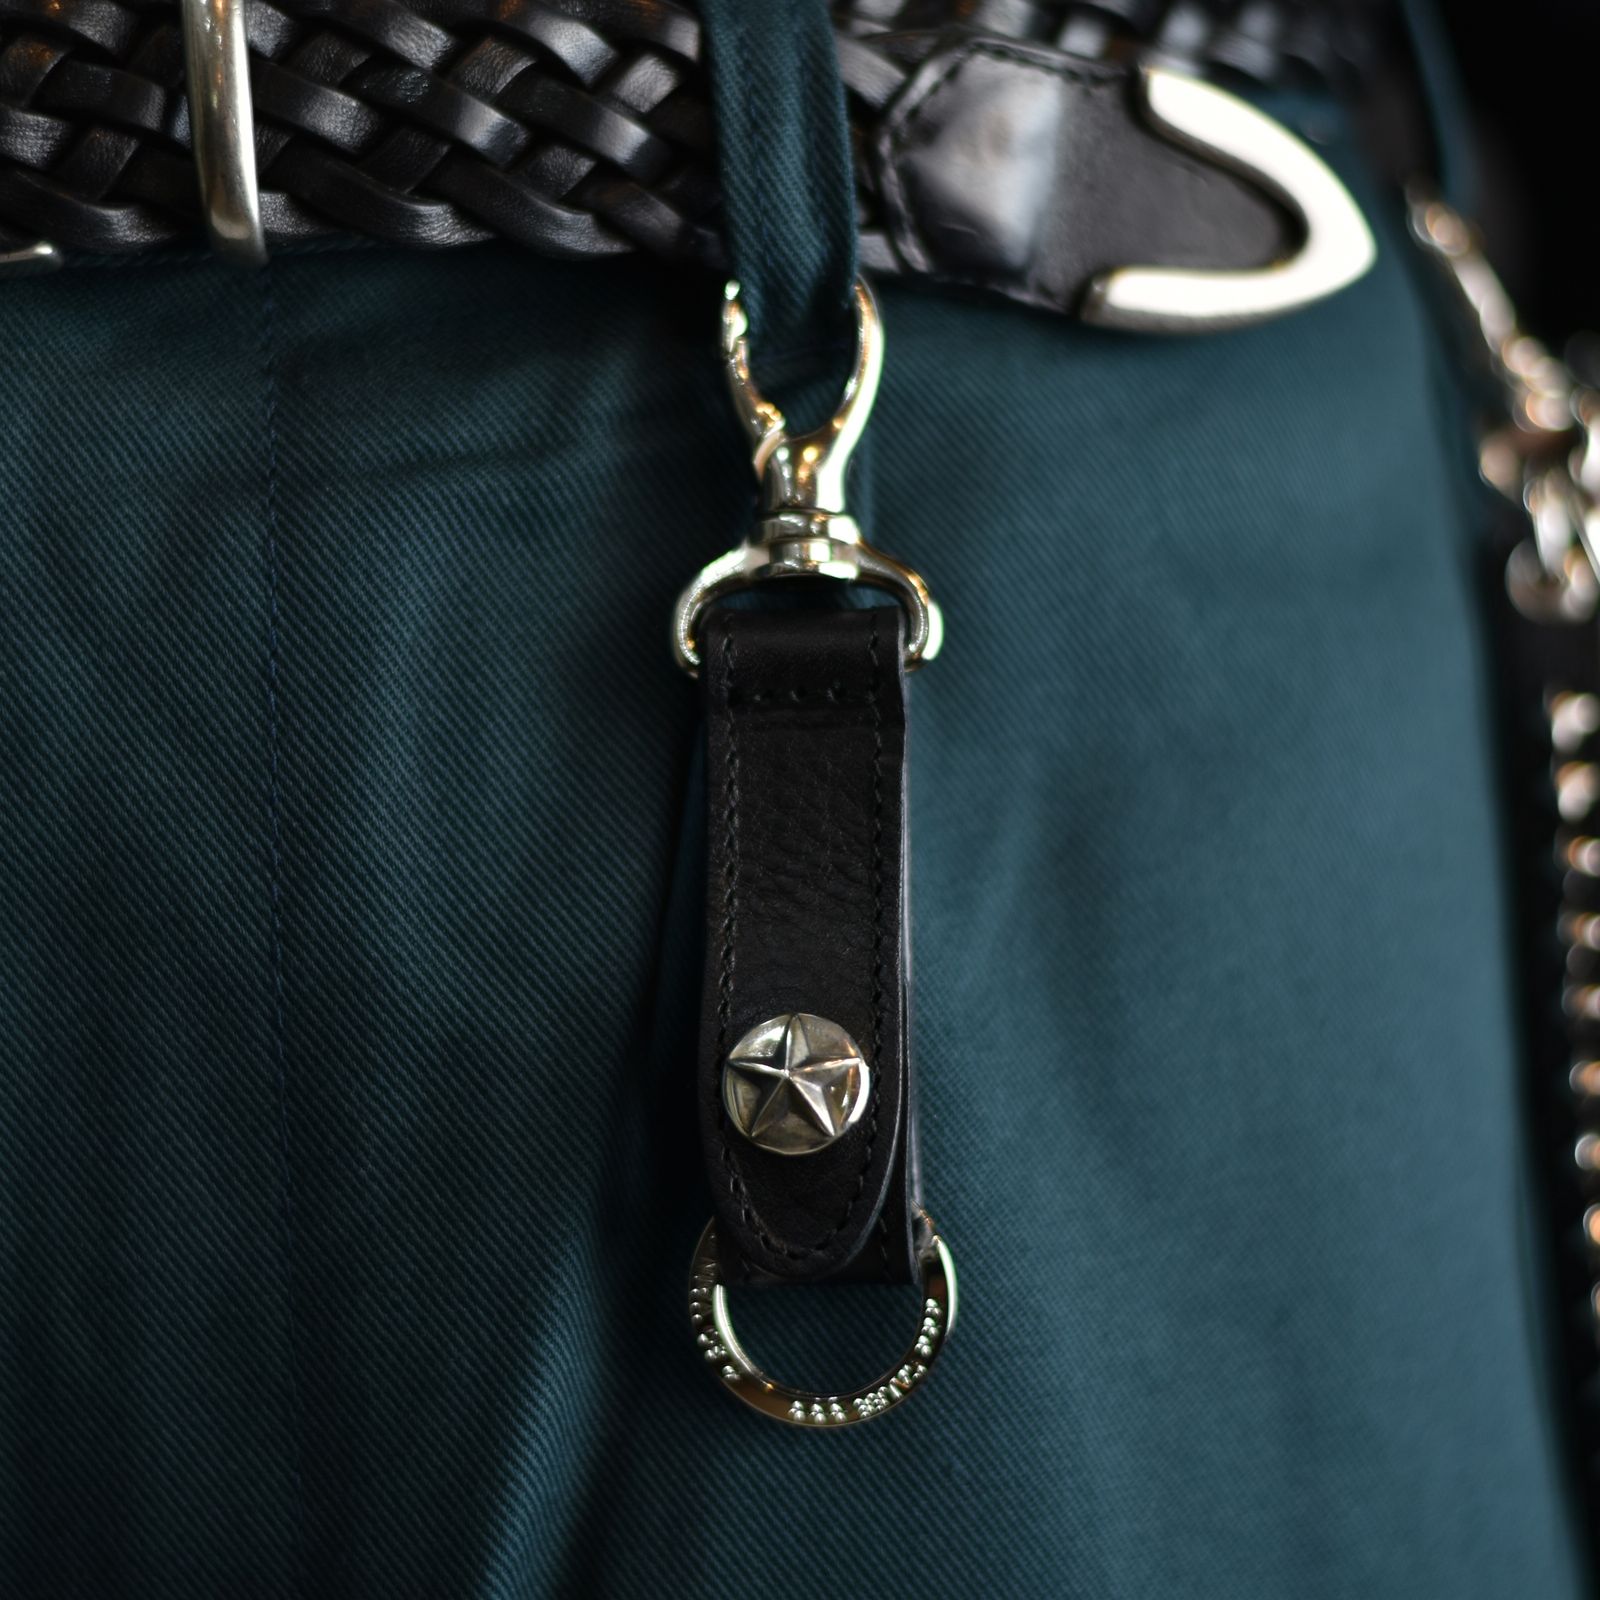 CALEE - SILVER STAR CONCHO LEATHER KEY RING (BLACK) / スター 